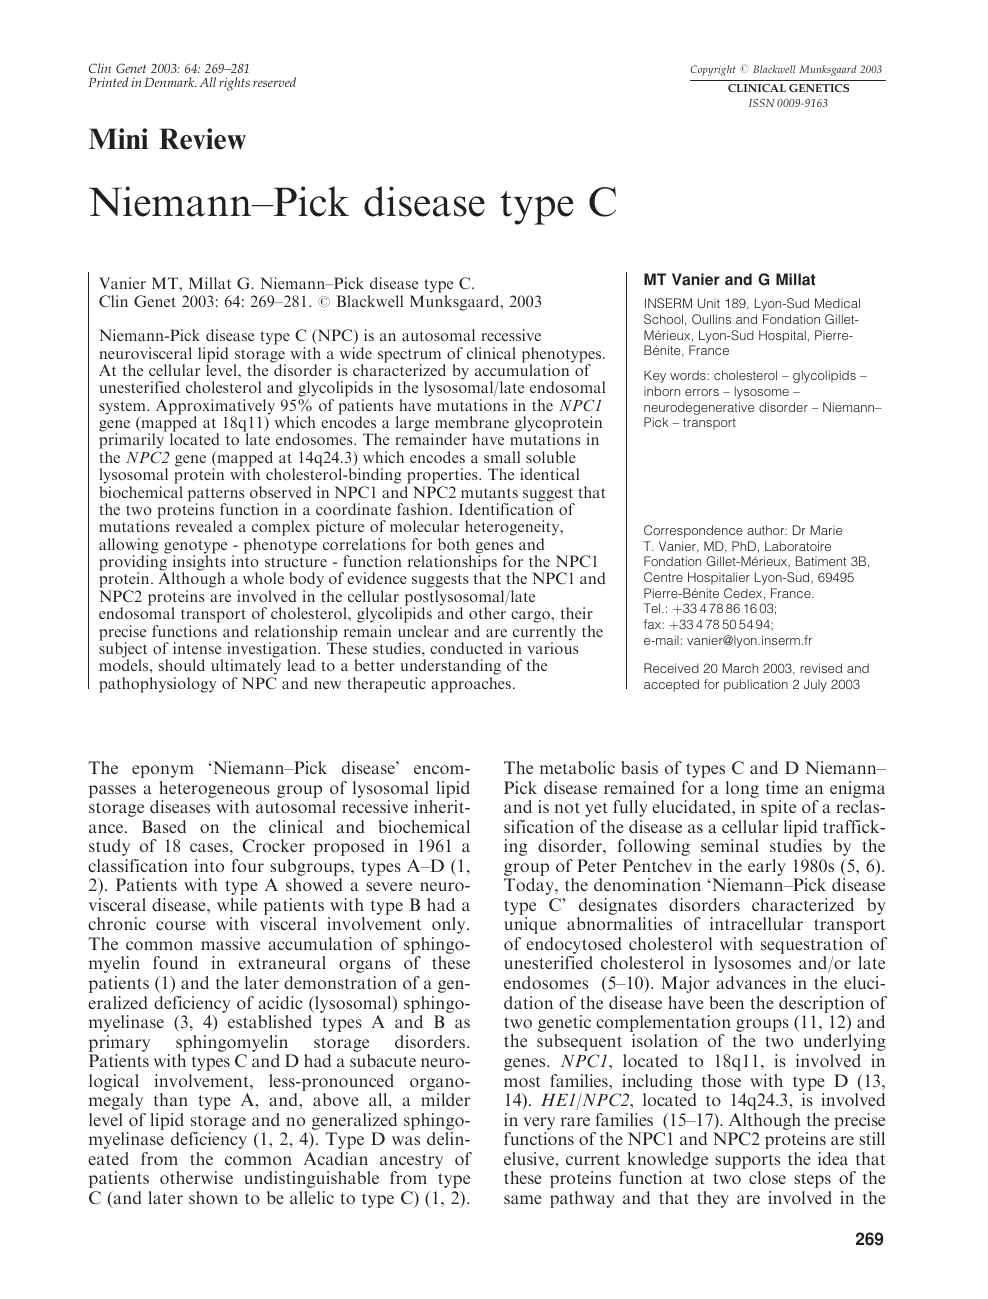 Therapeutic intervention for Niemann–Pick type C disease must target